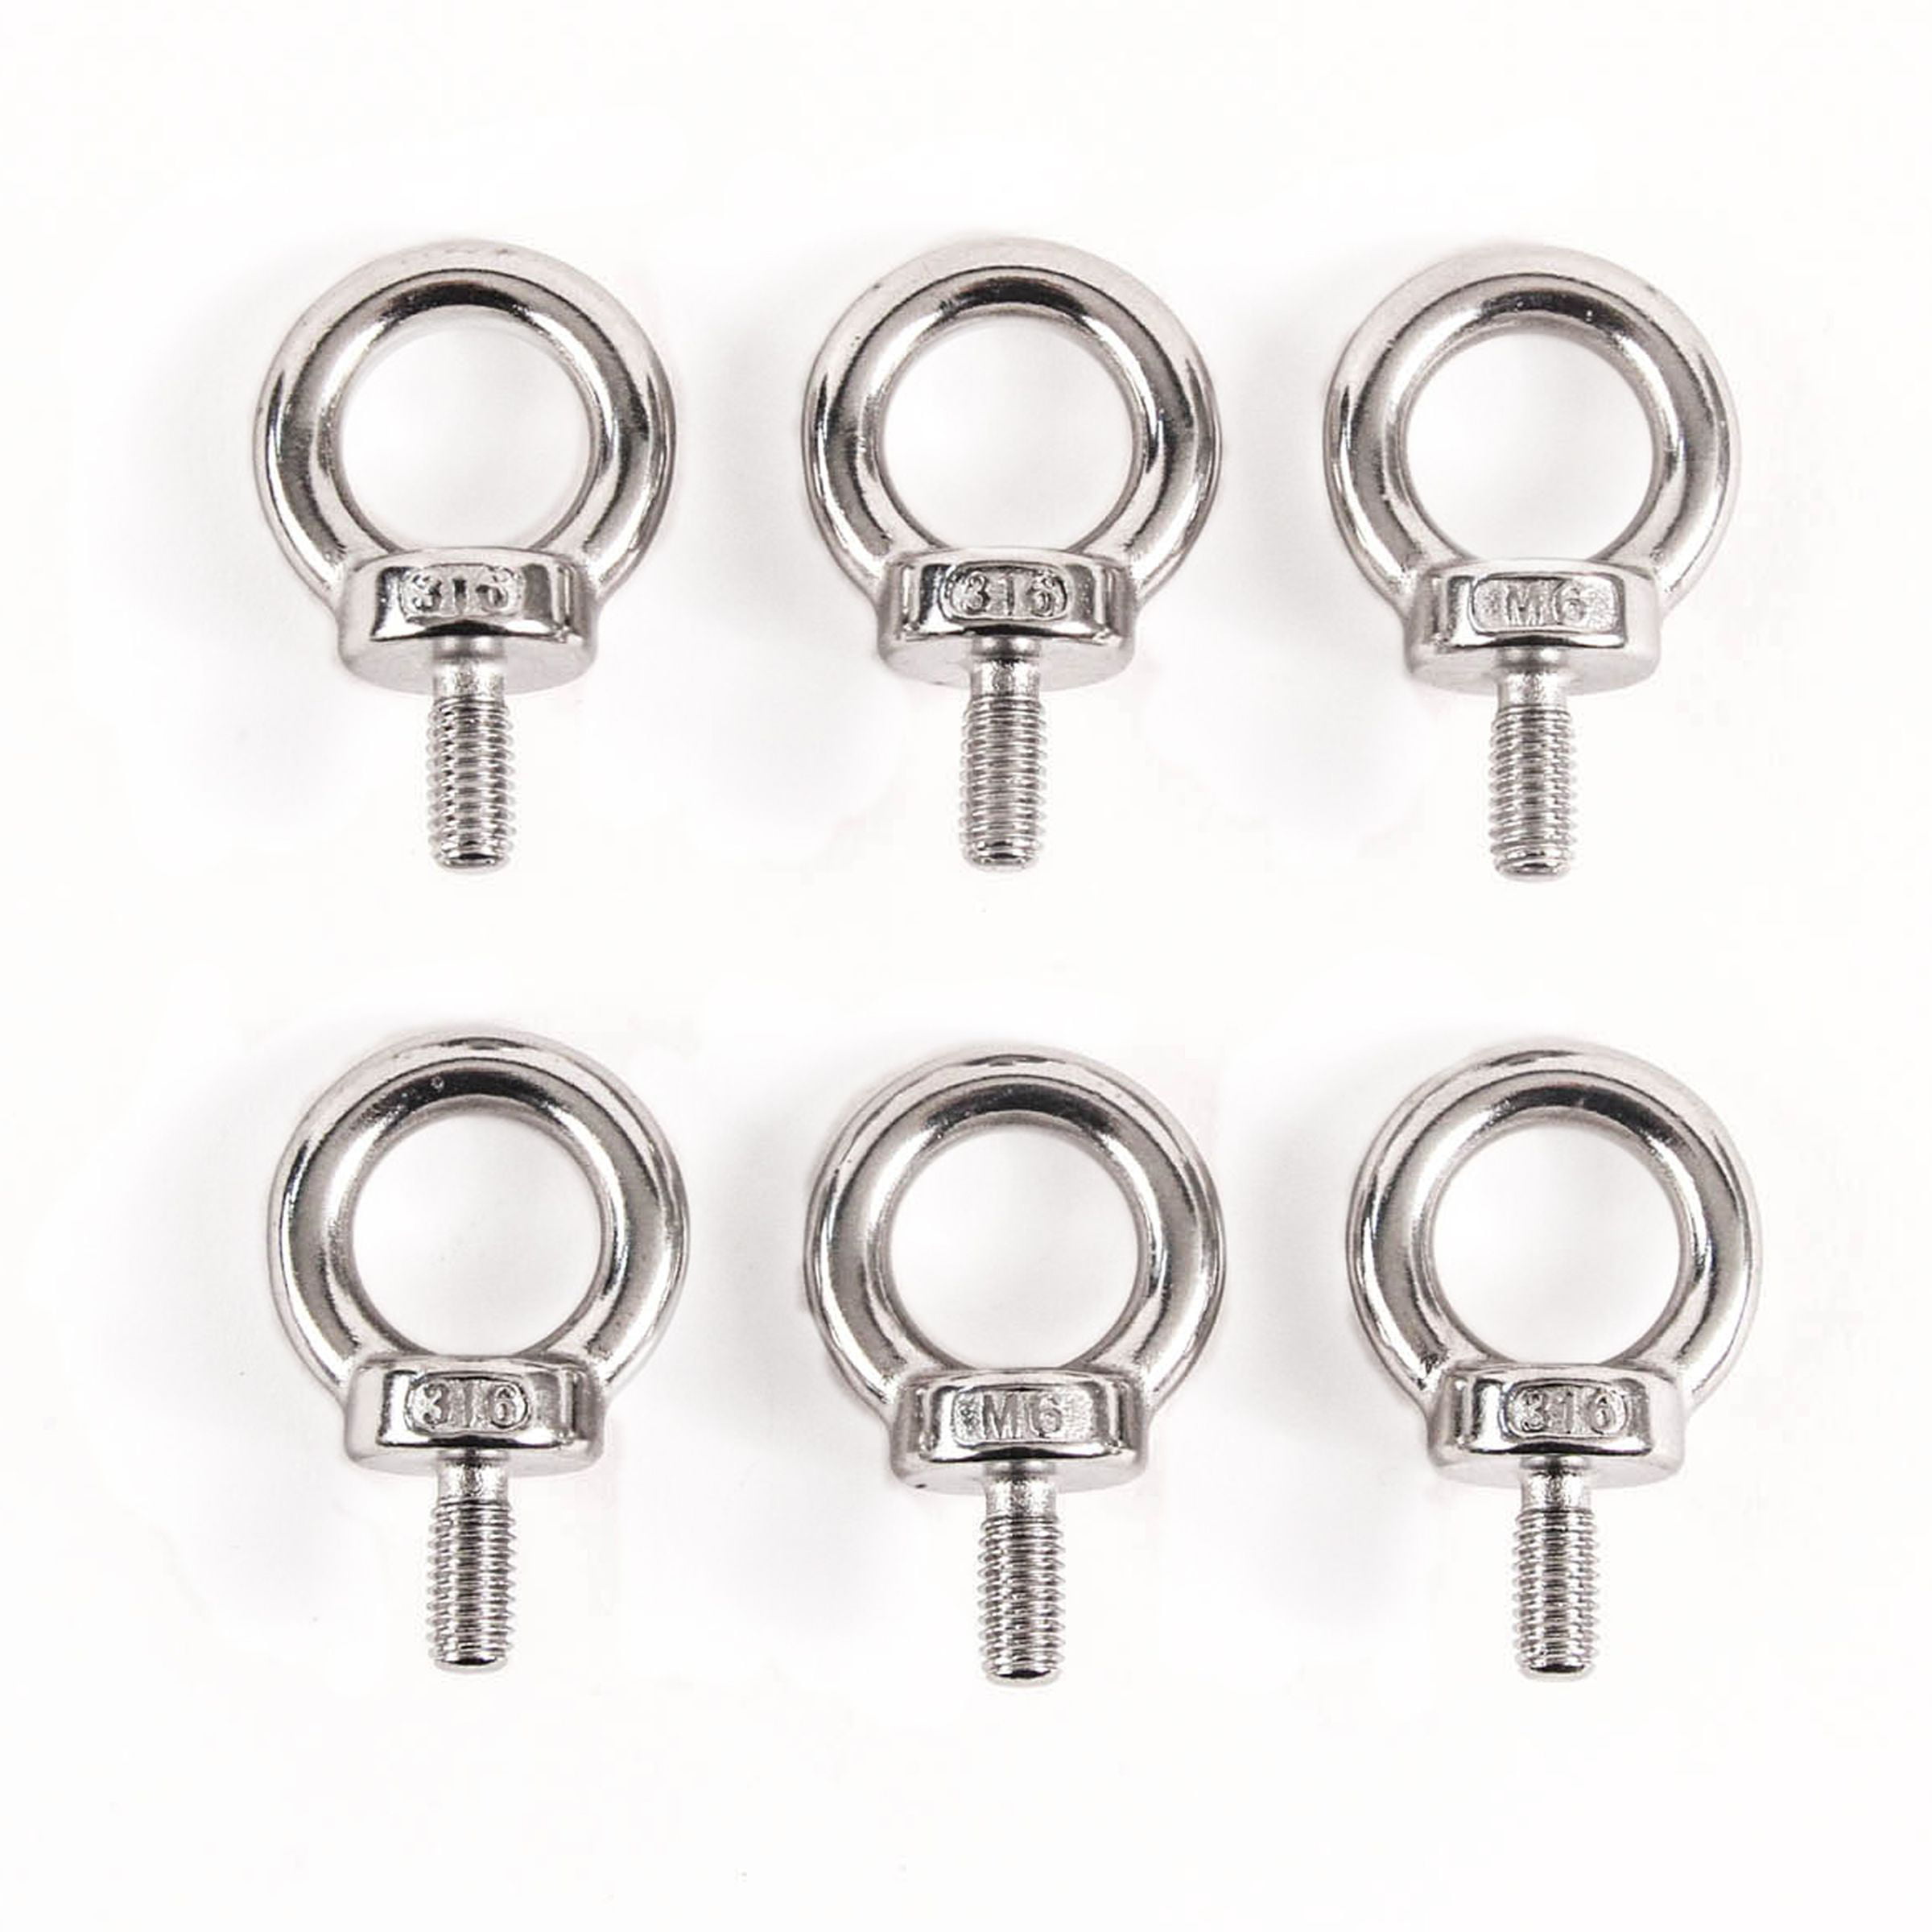 Red Hound Auto 8 Stainless Steel DIN 580 Machine Shoulder Lifting Eye Bolts M6 316SS Marine 6mm 